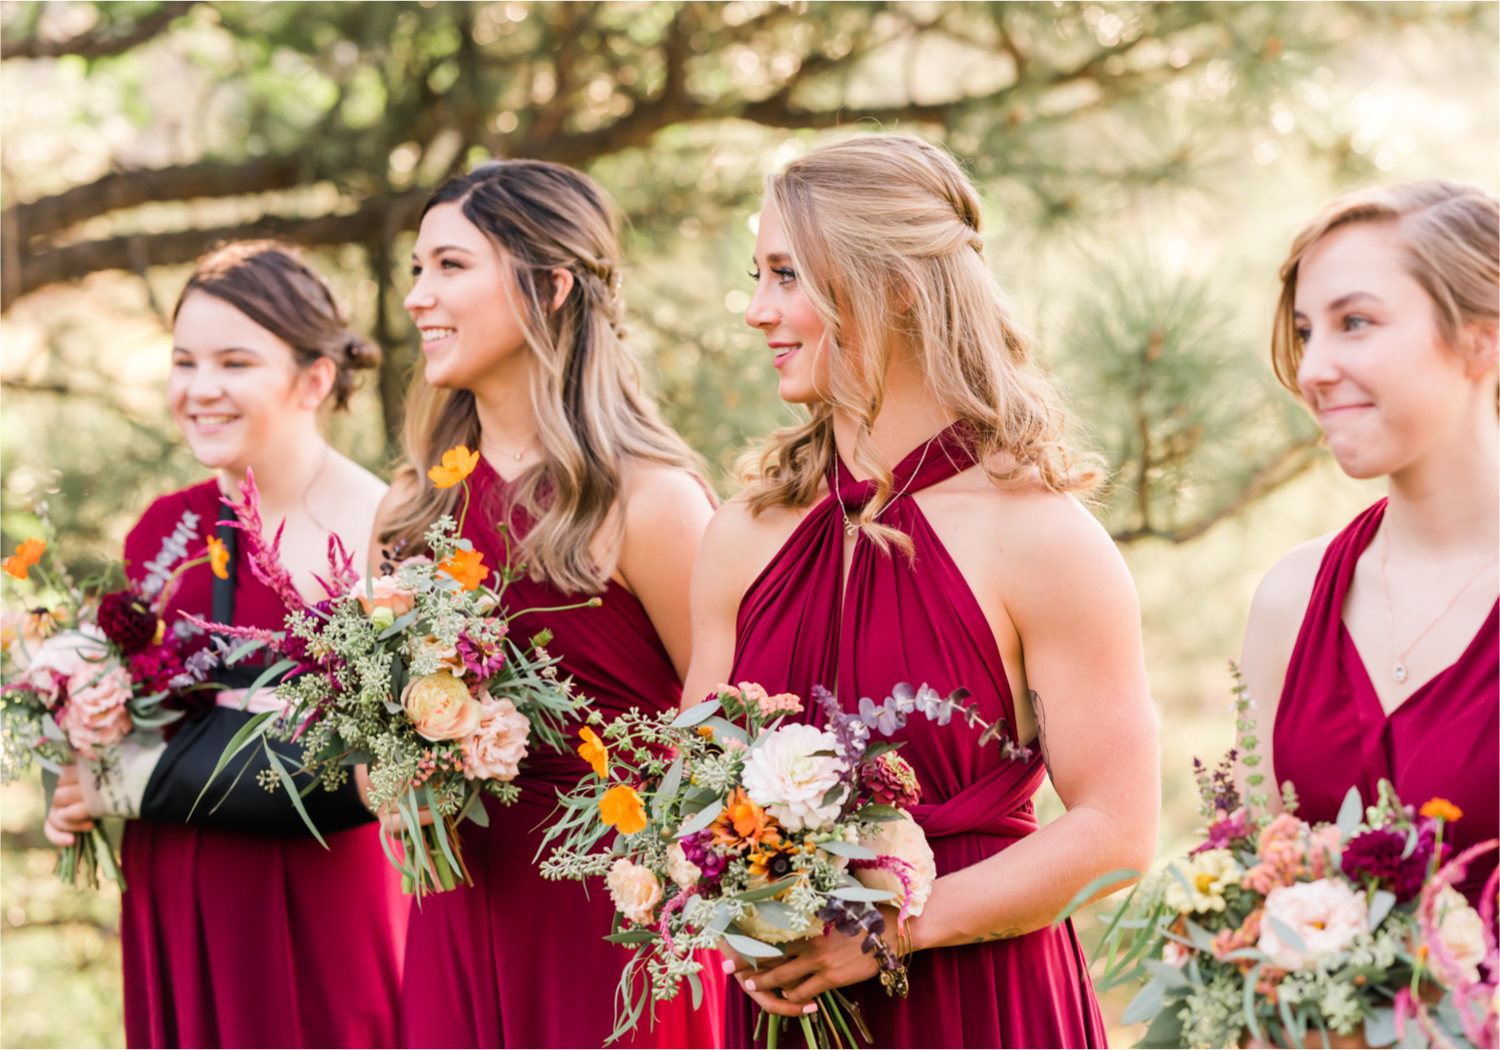 Romantic Whimsical Wedding at the Lionscrest Manor in Lyons, CO | Britni Girard Photography - Wedding Photo and Video Team | Rustic Fall Decor mixed in Burgundy, Blush, Gold and Sage | Wedding Dress from Anna Be Bridal by Hailey Paige | Hair and Makeup by Glam 5280 Chaundra Revier | Florals by Aflorae | Ceremony Site overlooking the Rocky Mountains | Mountaintop Ceremony | Bride Entrance